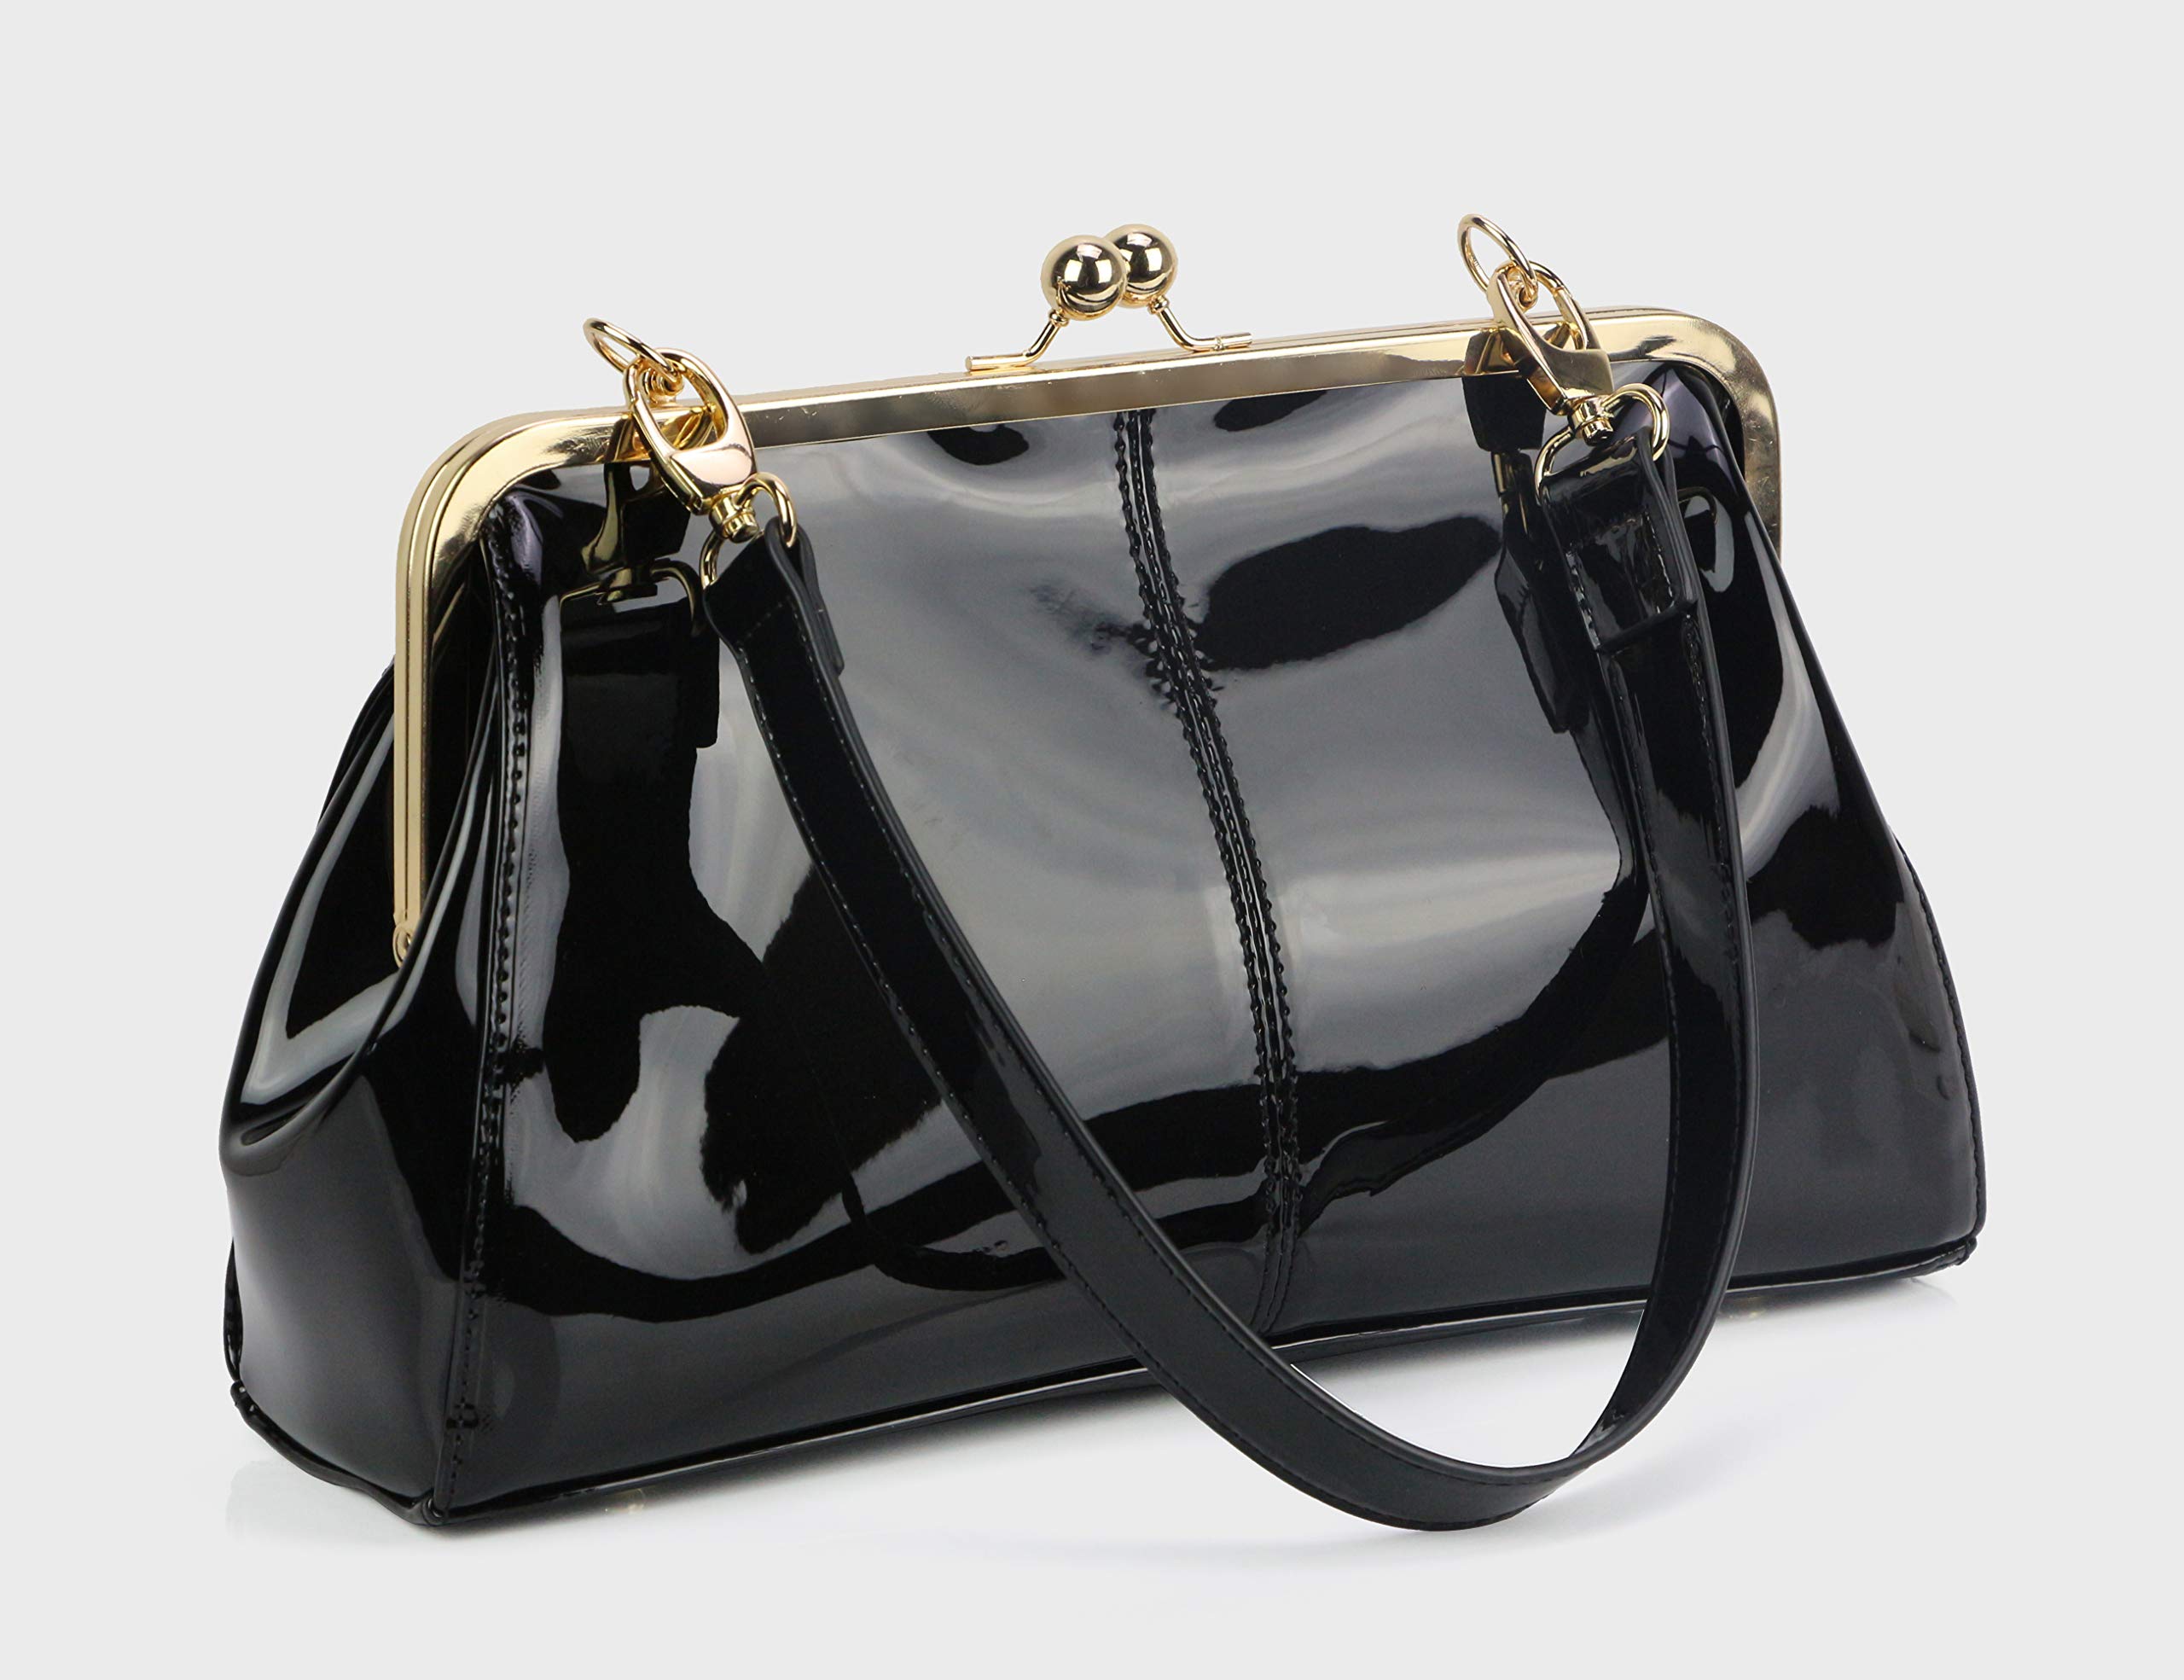 Vintage Kiss Lock Handbags Shiny Patent Leather Evening Clutch Purse Tote Bags with Two Straps